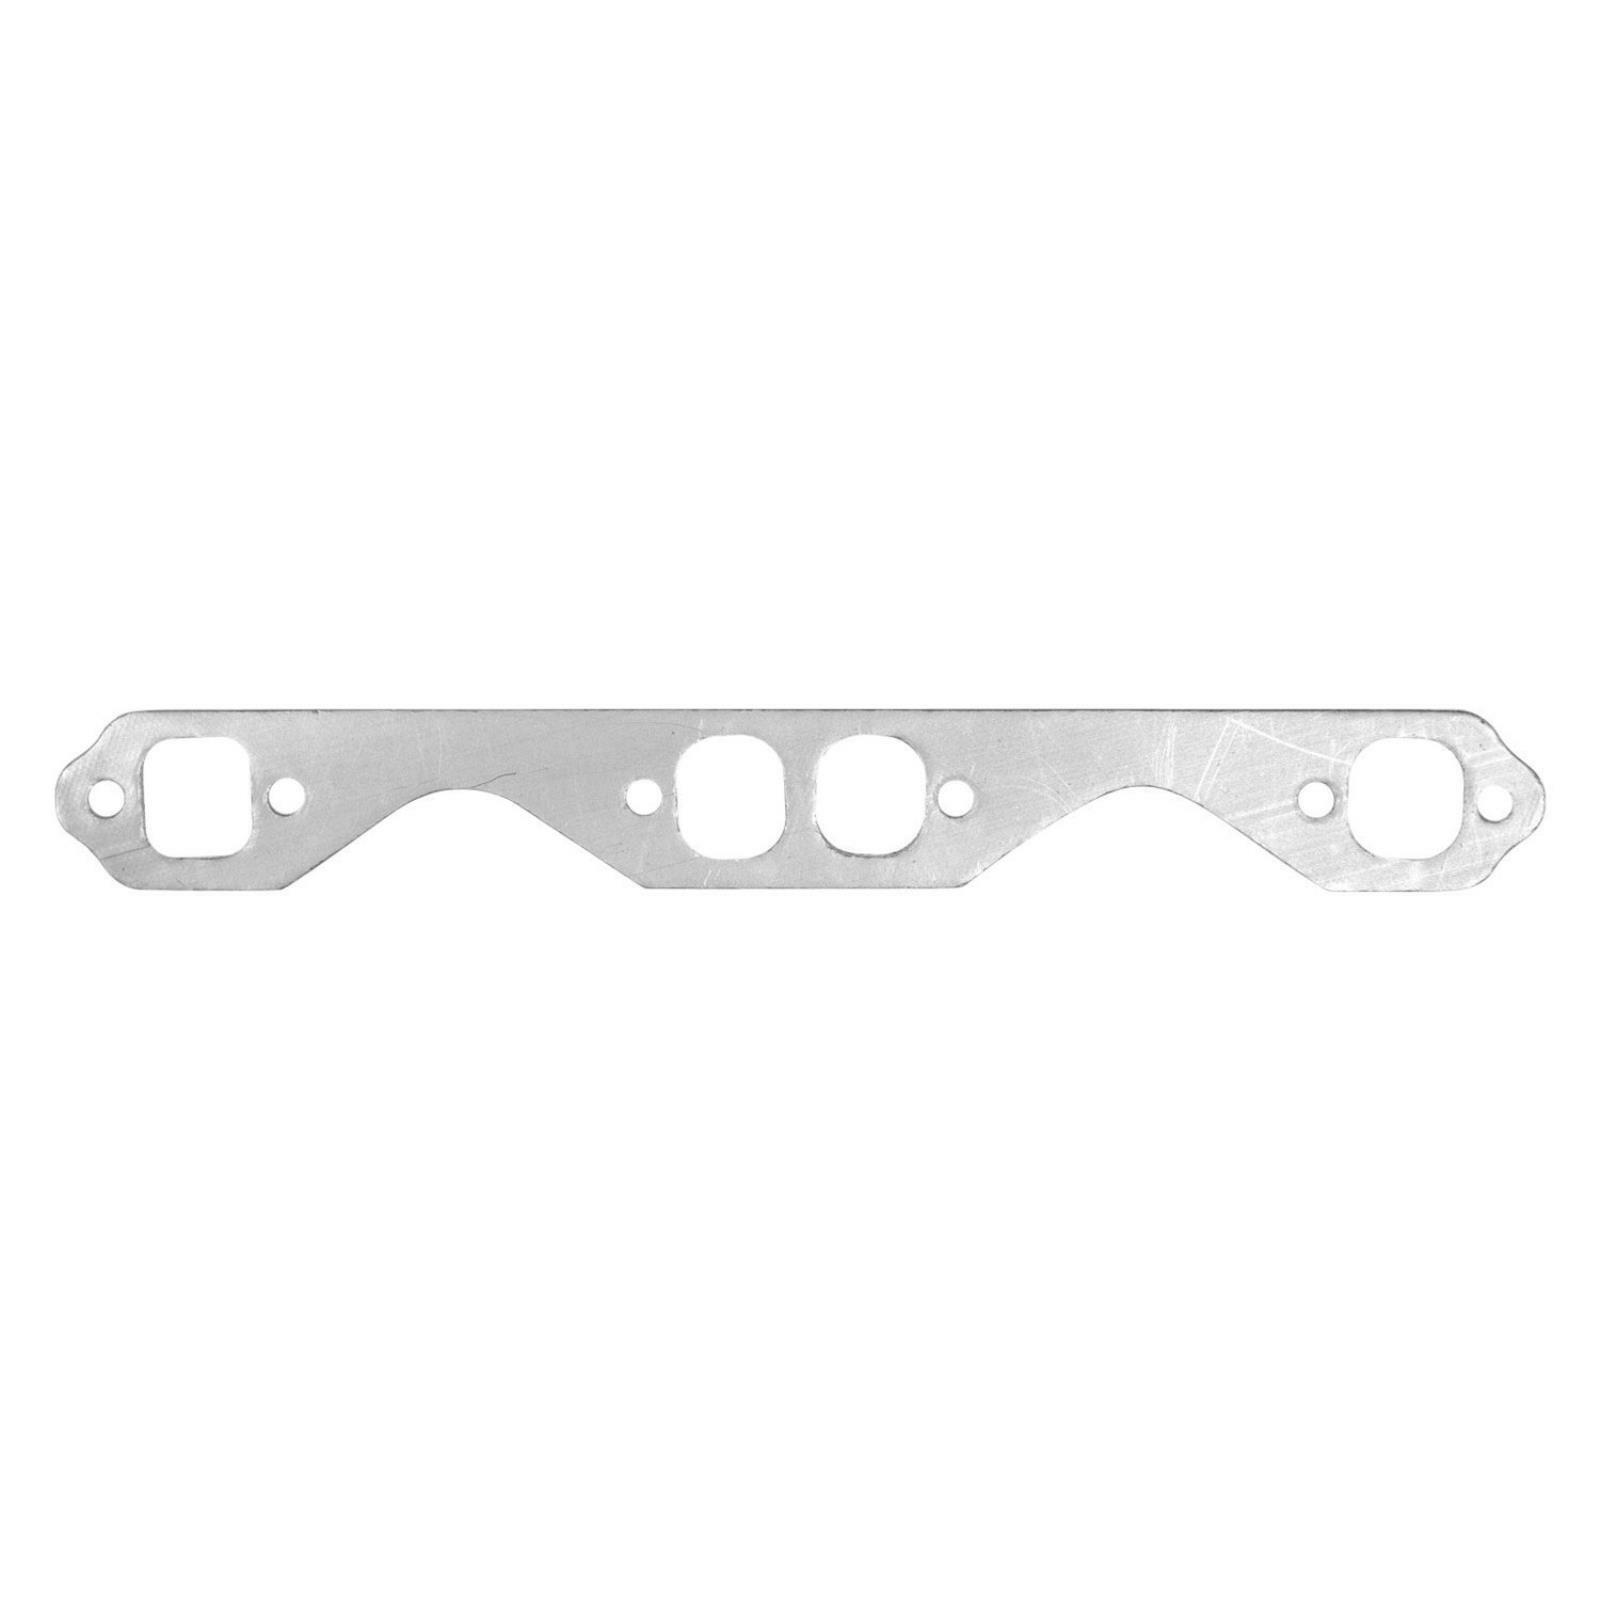 Remflex CB919E - Exhaust Header Gaskets Fits 1959-1961 Chevy Parkwood